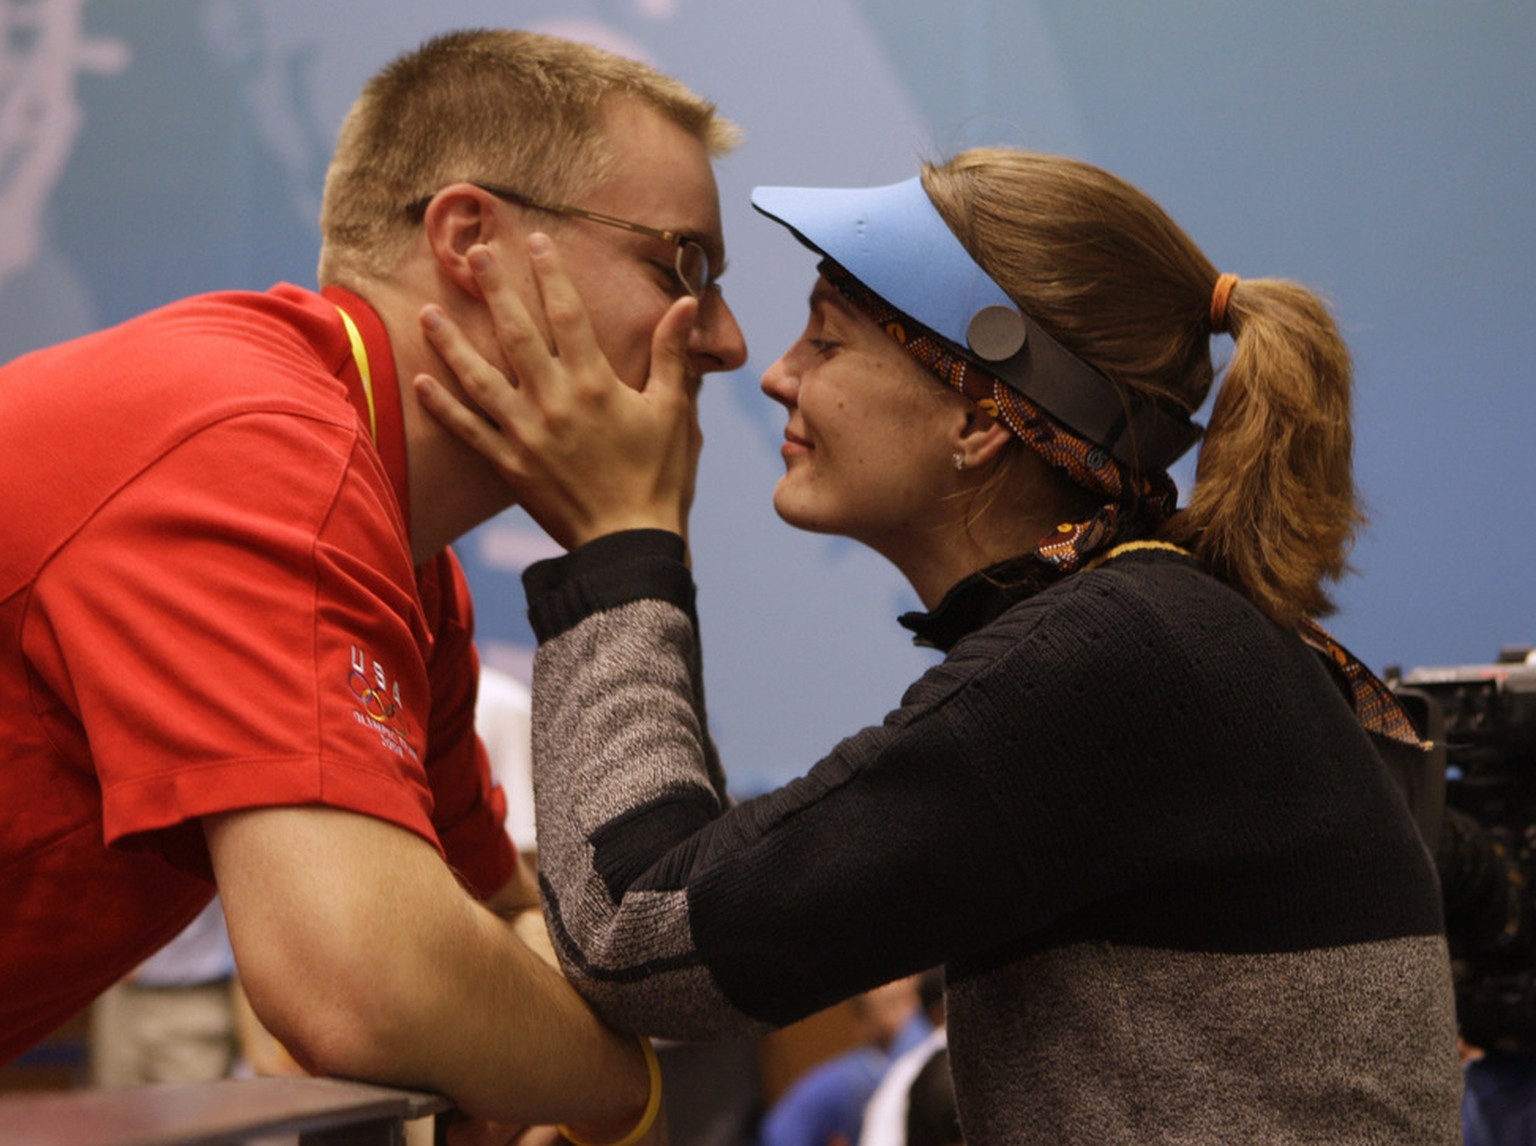 Czech Republic's Katerina Emmons is congratulated by her husband Matt Emmons of the US after winning the first gold medal of the games in the Women's 10 meters air rifle final round at the Shooting Ra ...